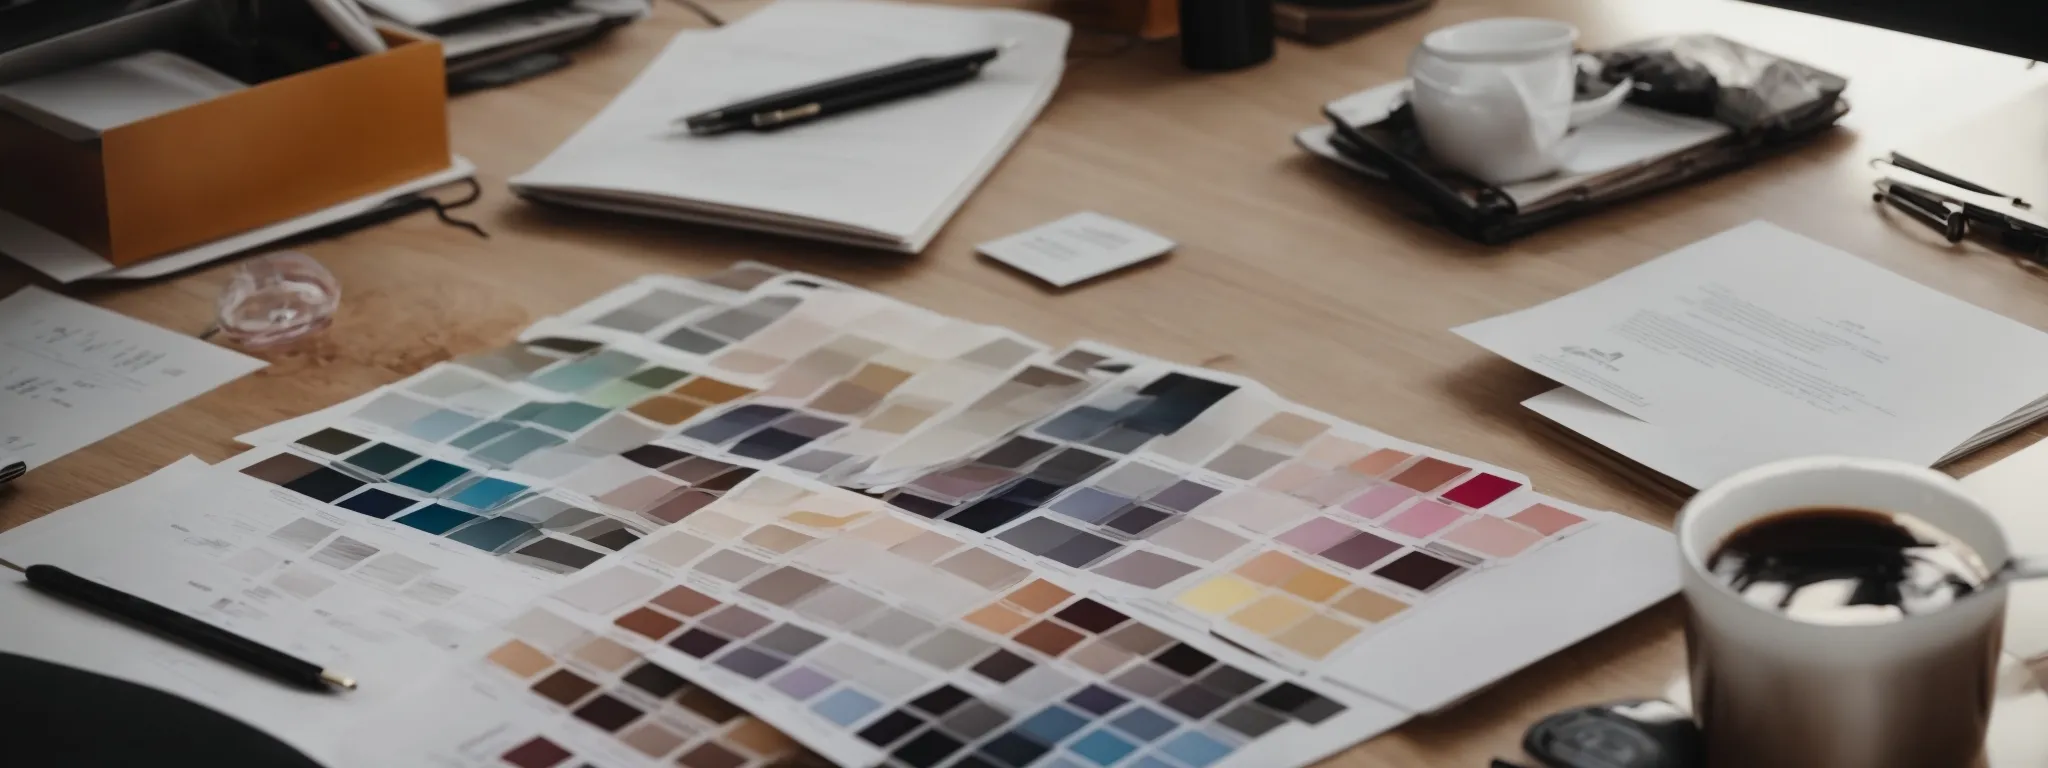 A Designer Analyzes Color Swatches And Sketches On A Minimalist Desk, Crafting A Coherent Brand Image.